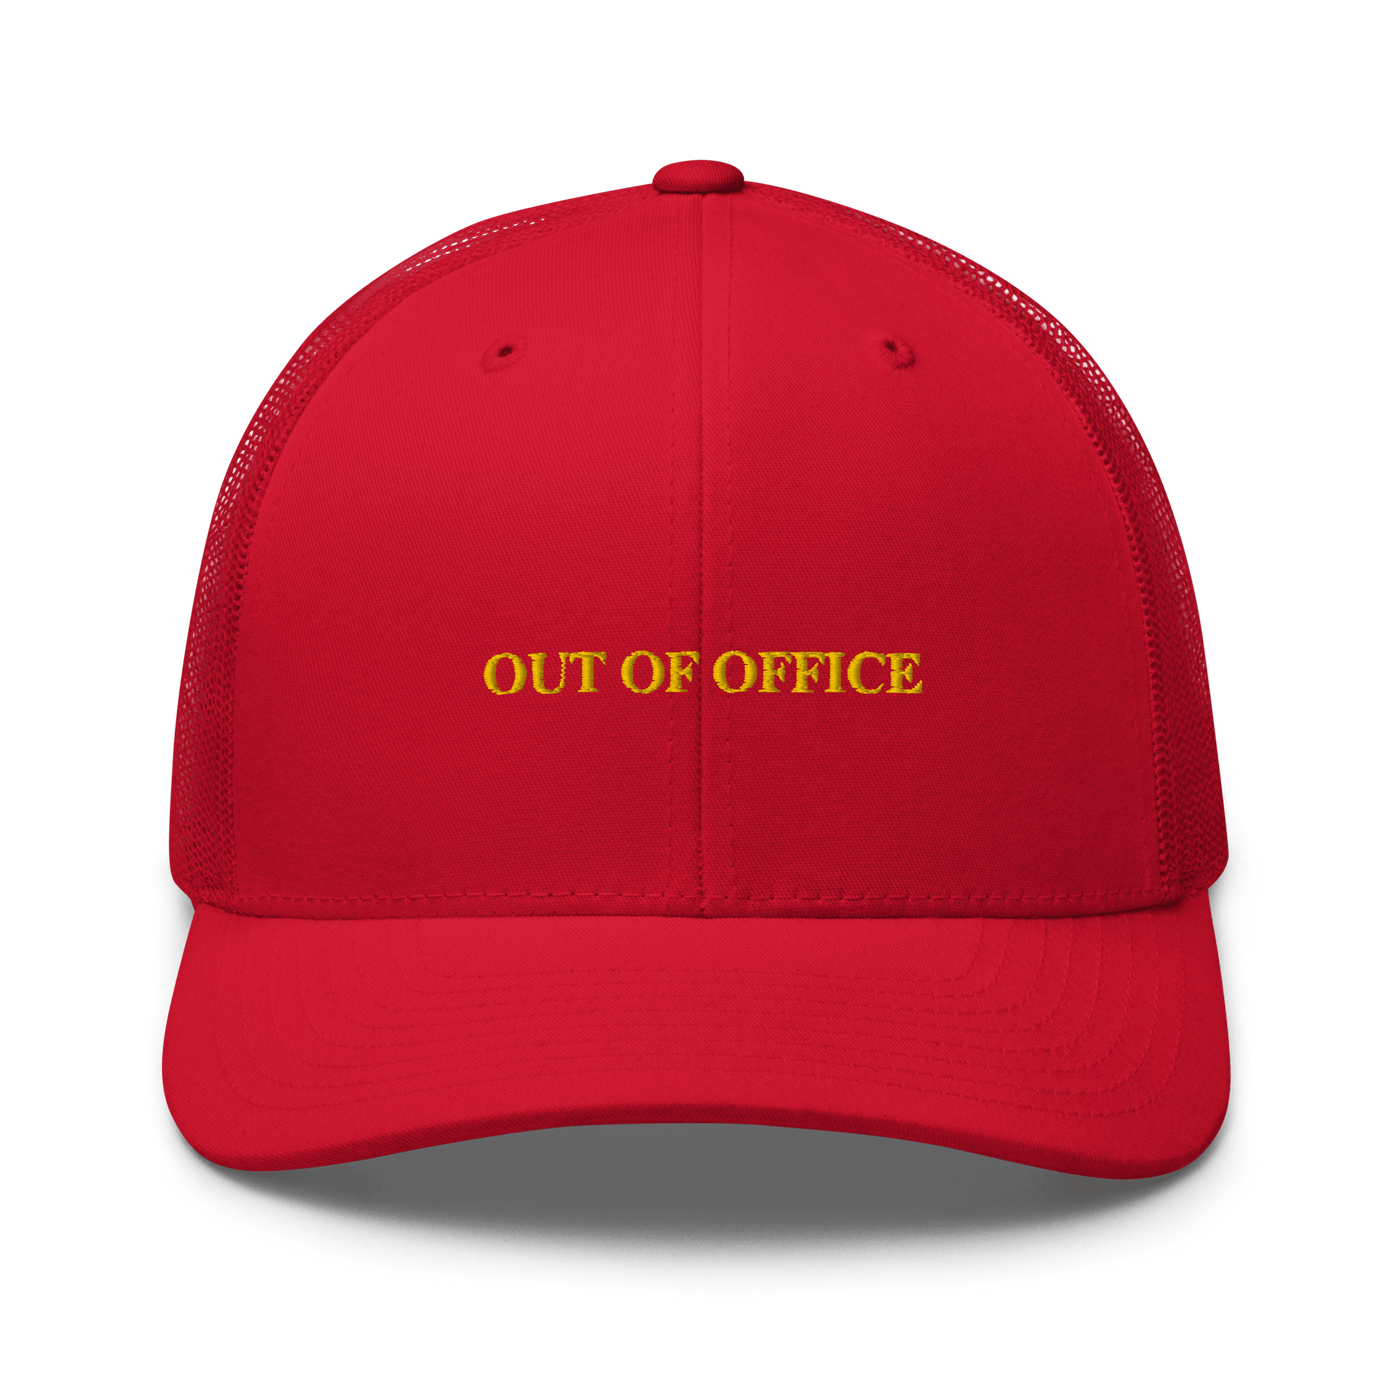 OUT OF OFFICE Trucker Cap - Red - - Just Another Cap Store